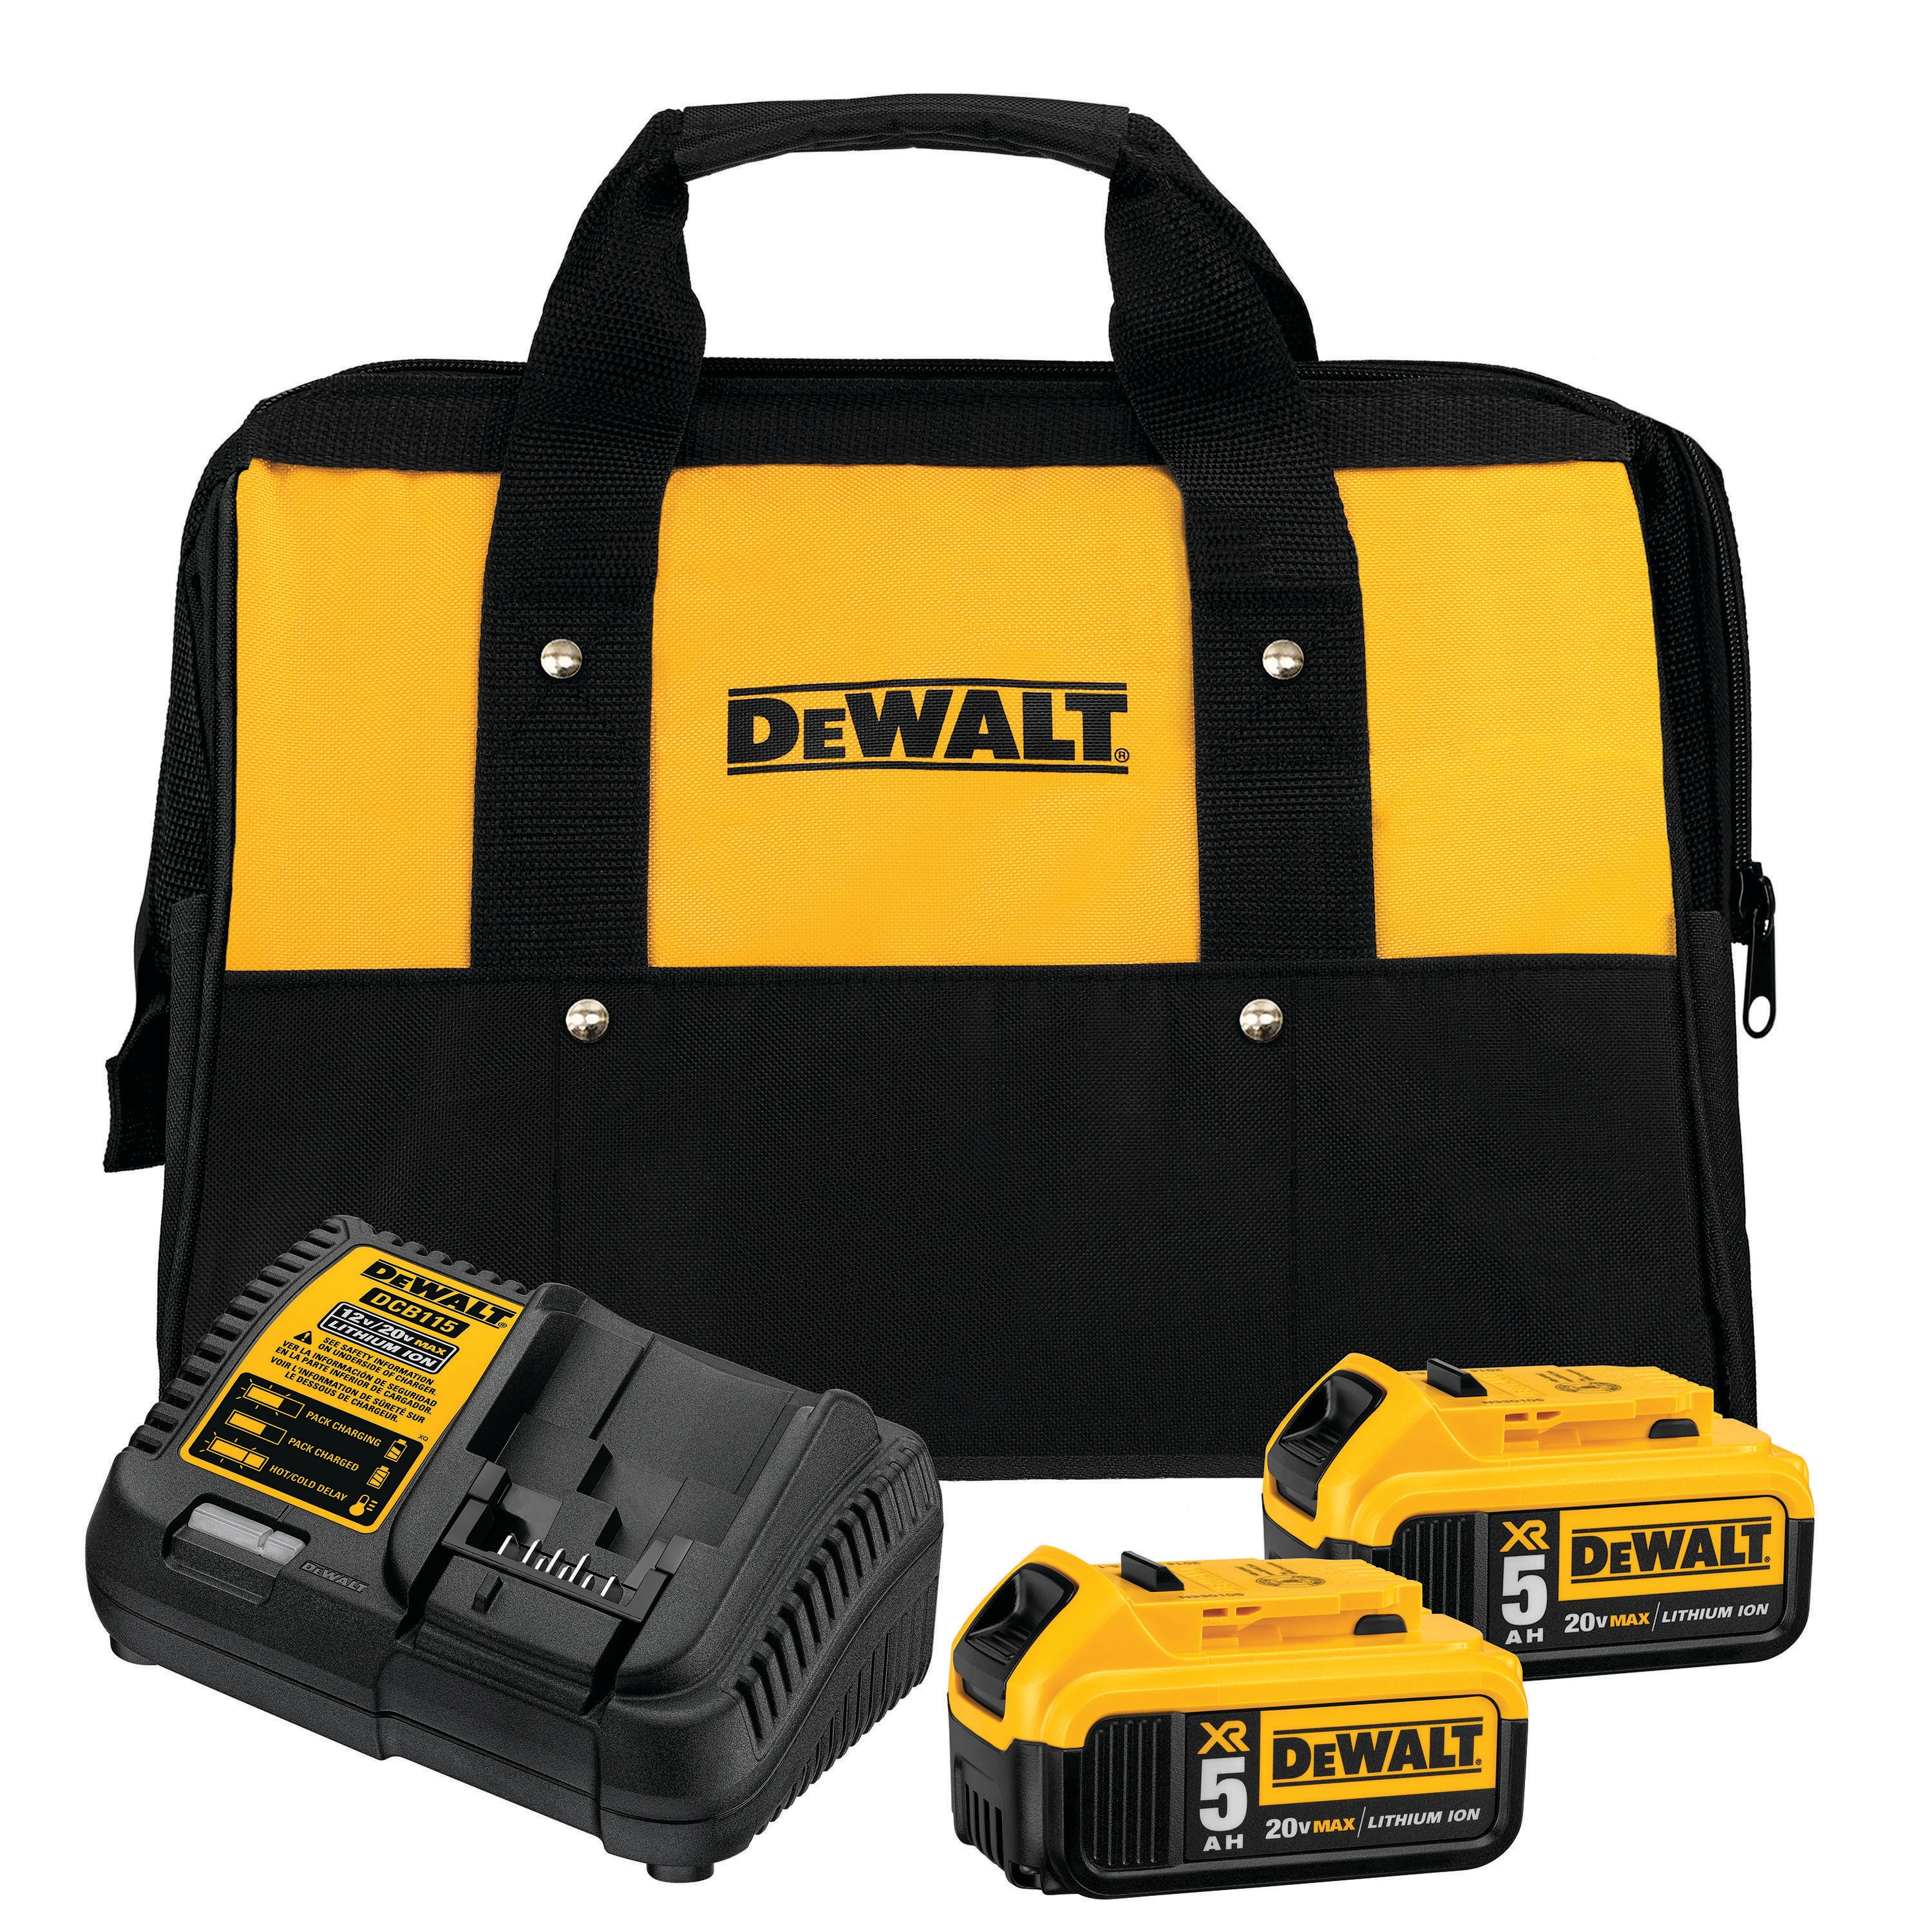 Dewalt XR 20V 2-Pack 5 Amp-Hour Batteries and Charger Kit plus free tool or battery $199